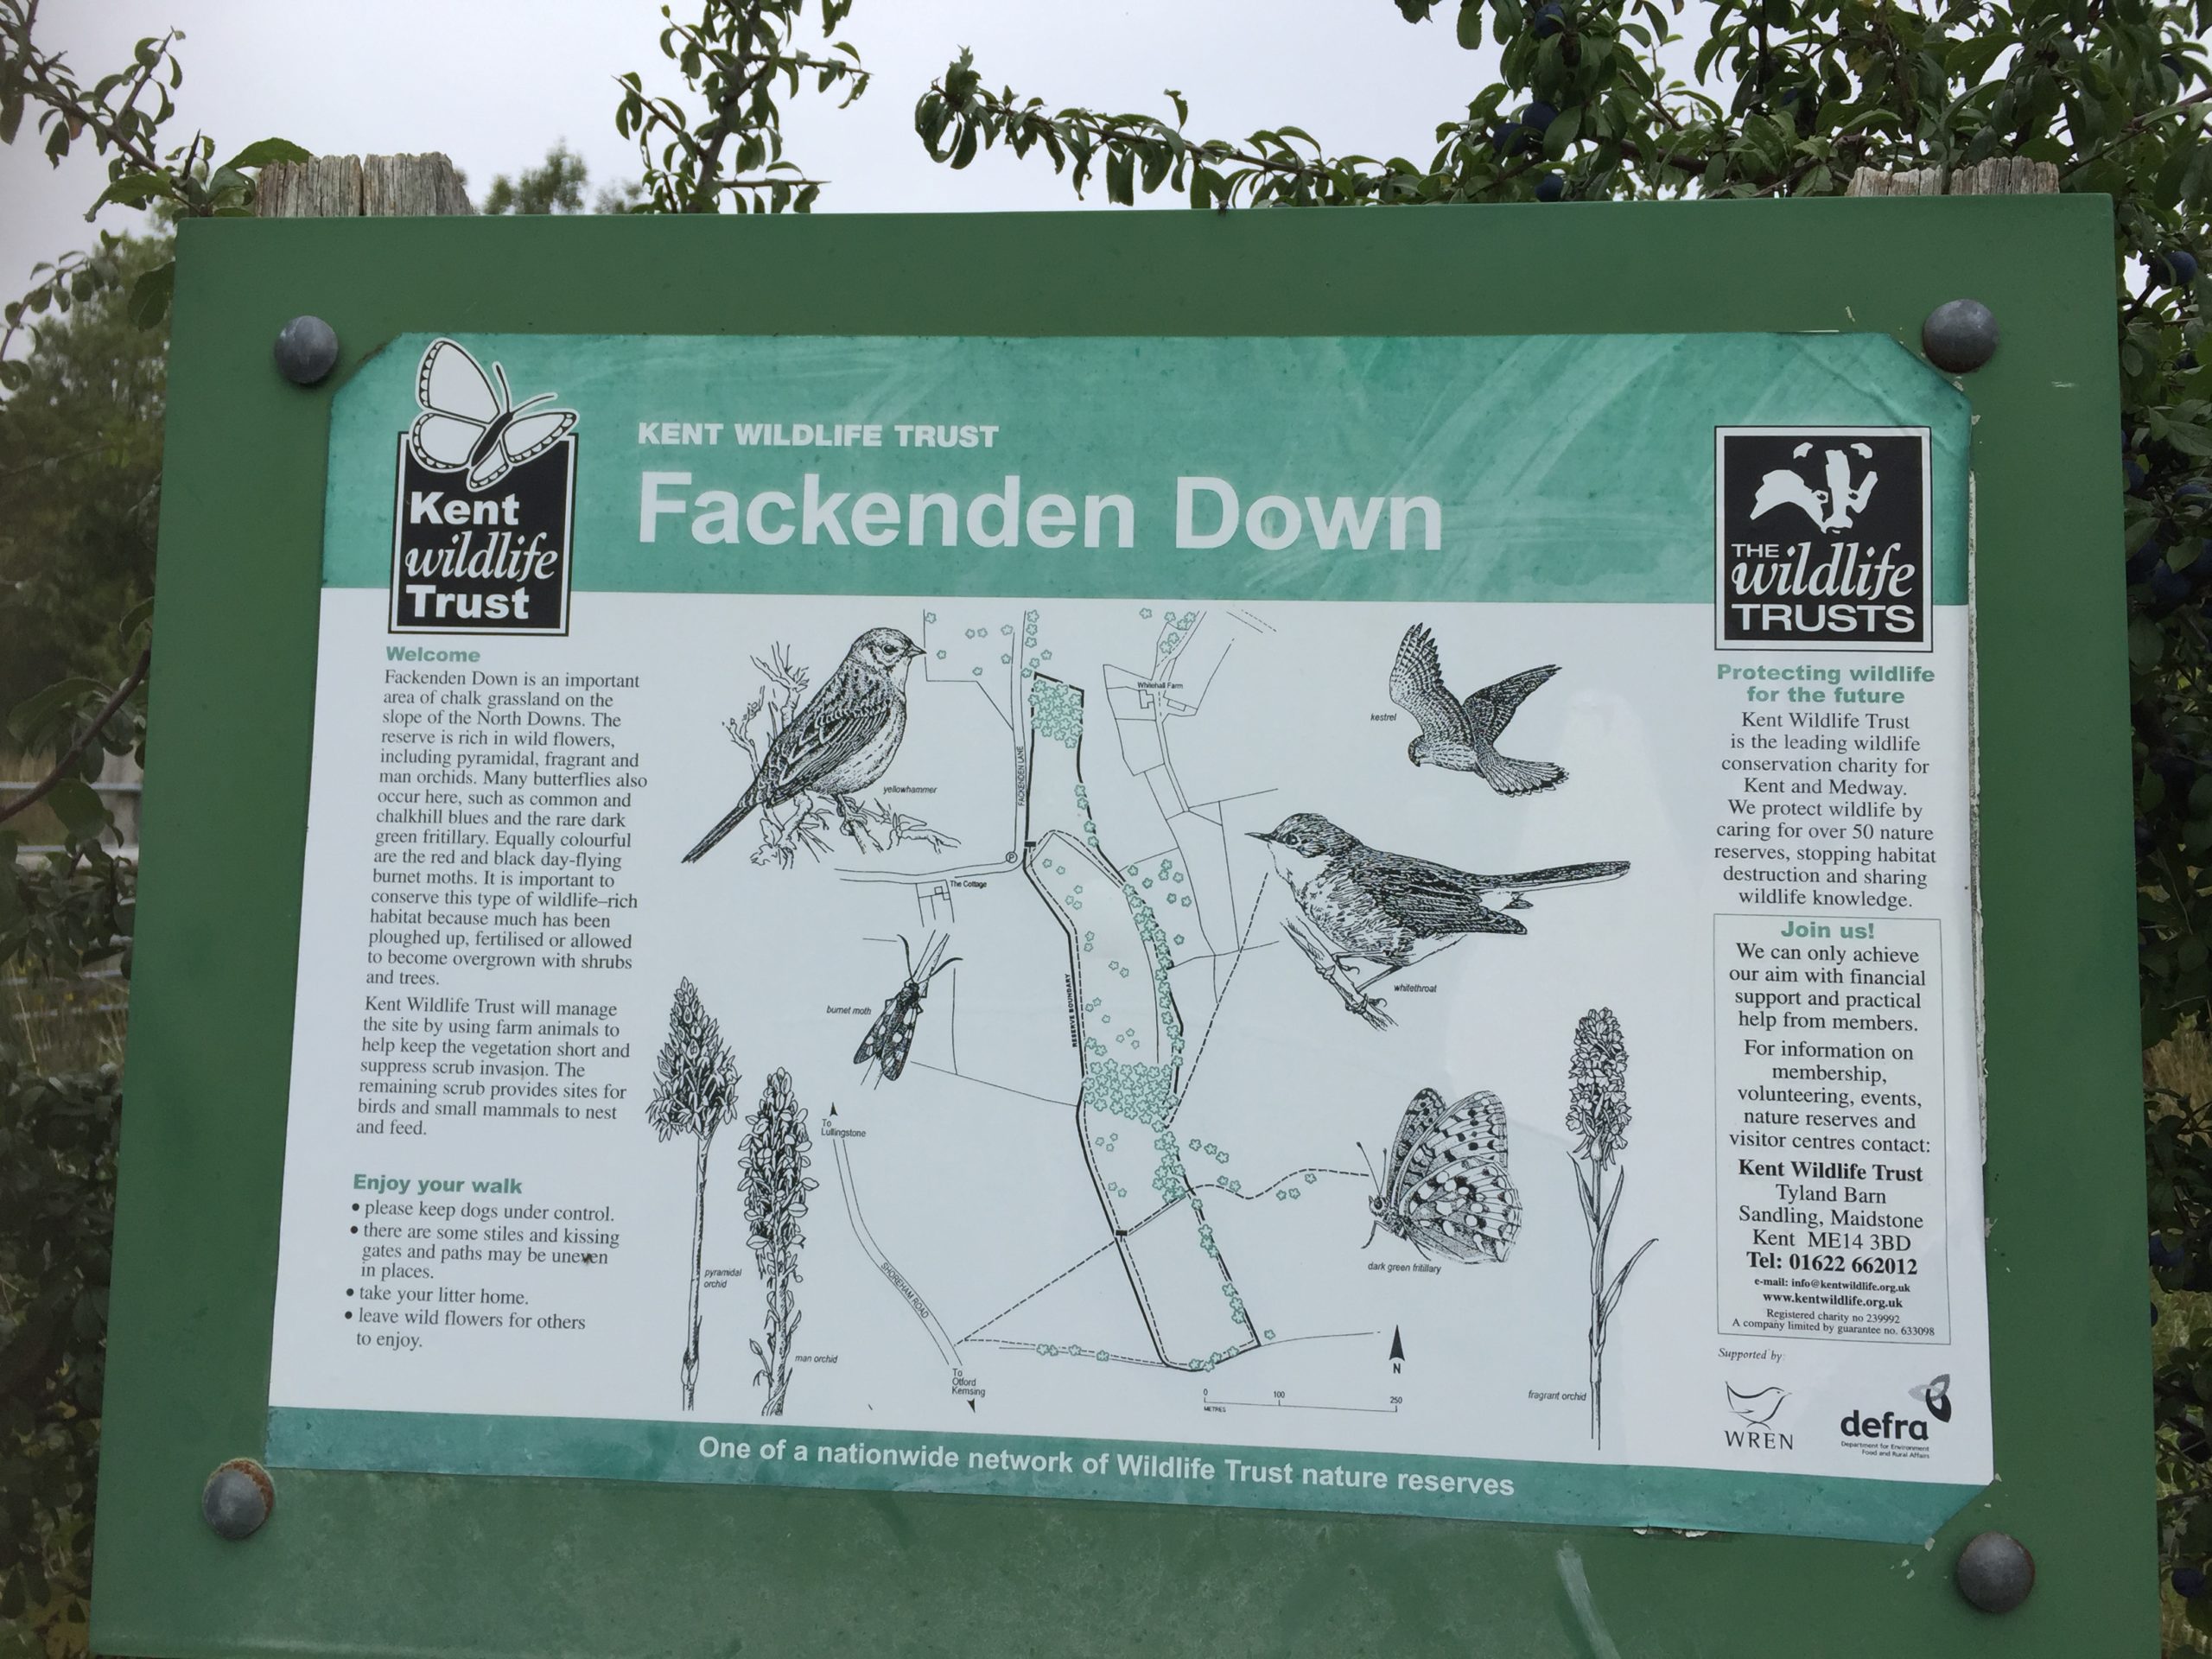 Information board about Fackenden Down